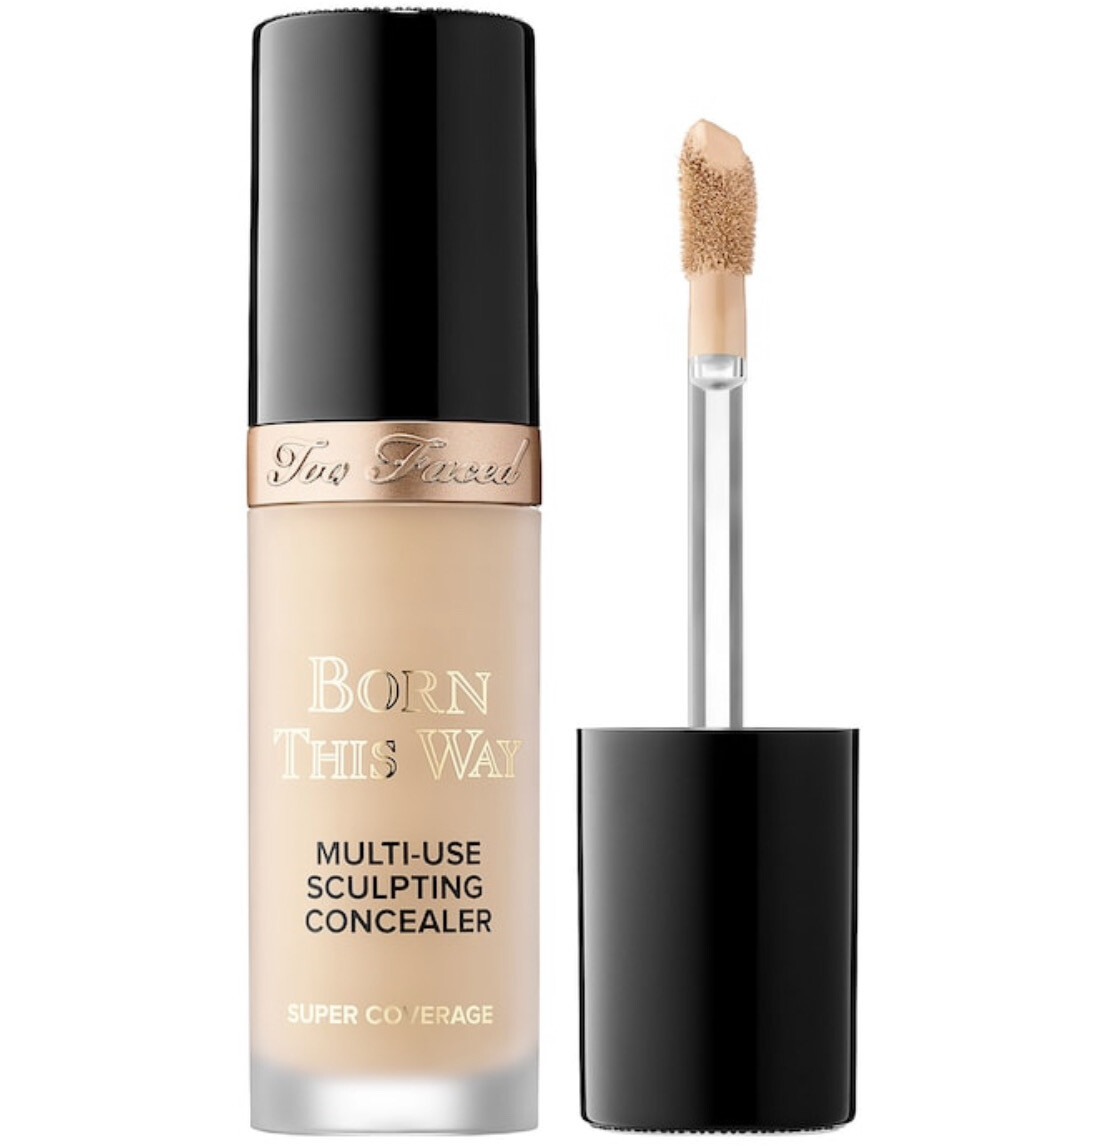 Too Faced - Born This Way Super Coverage Multi-Use Concealer | Vanilla 